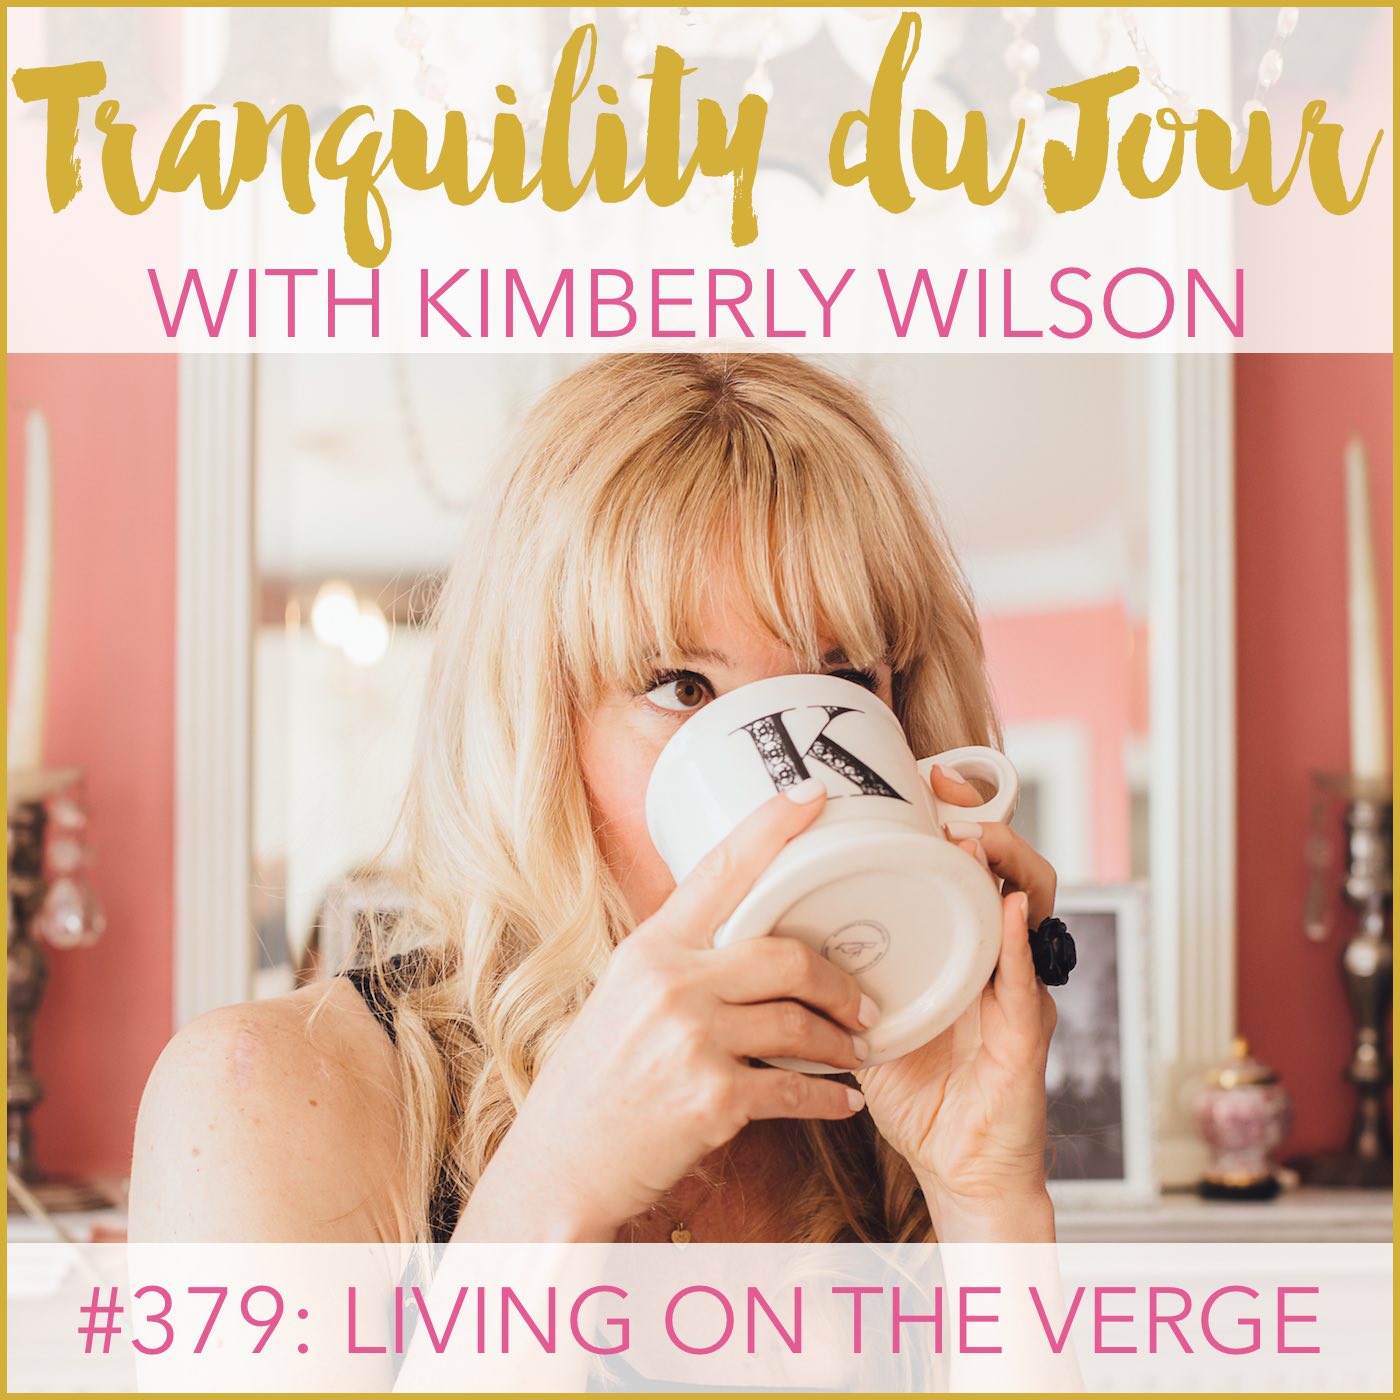 Tranquility du Jour #379: Living on the Verge